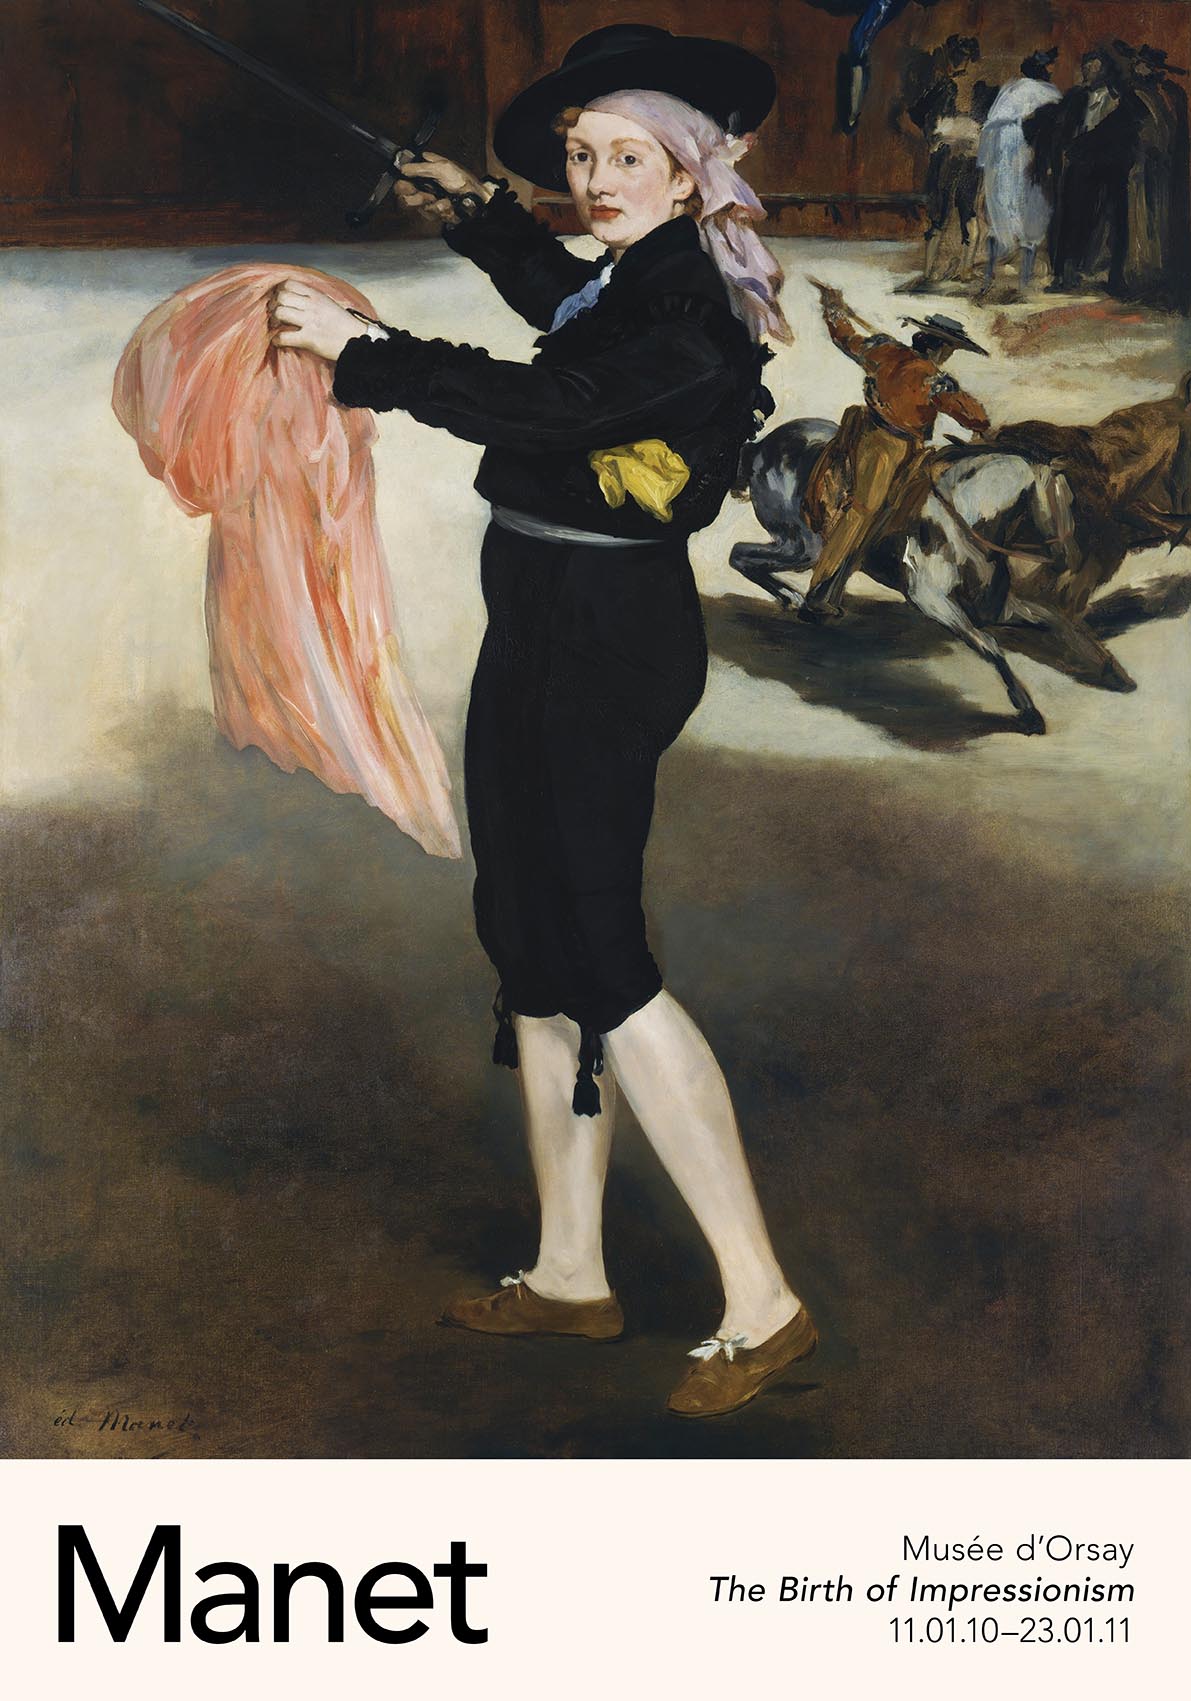 Mademoiselle Victorine by Manet Exhibition Poster